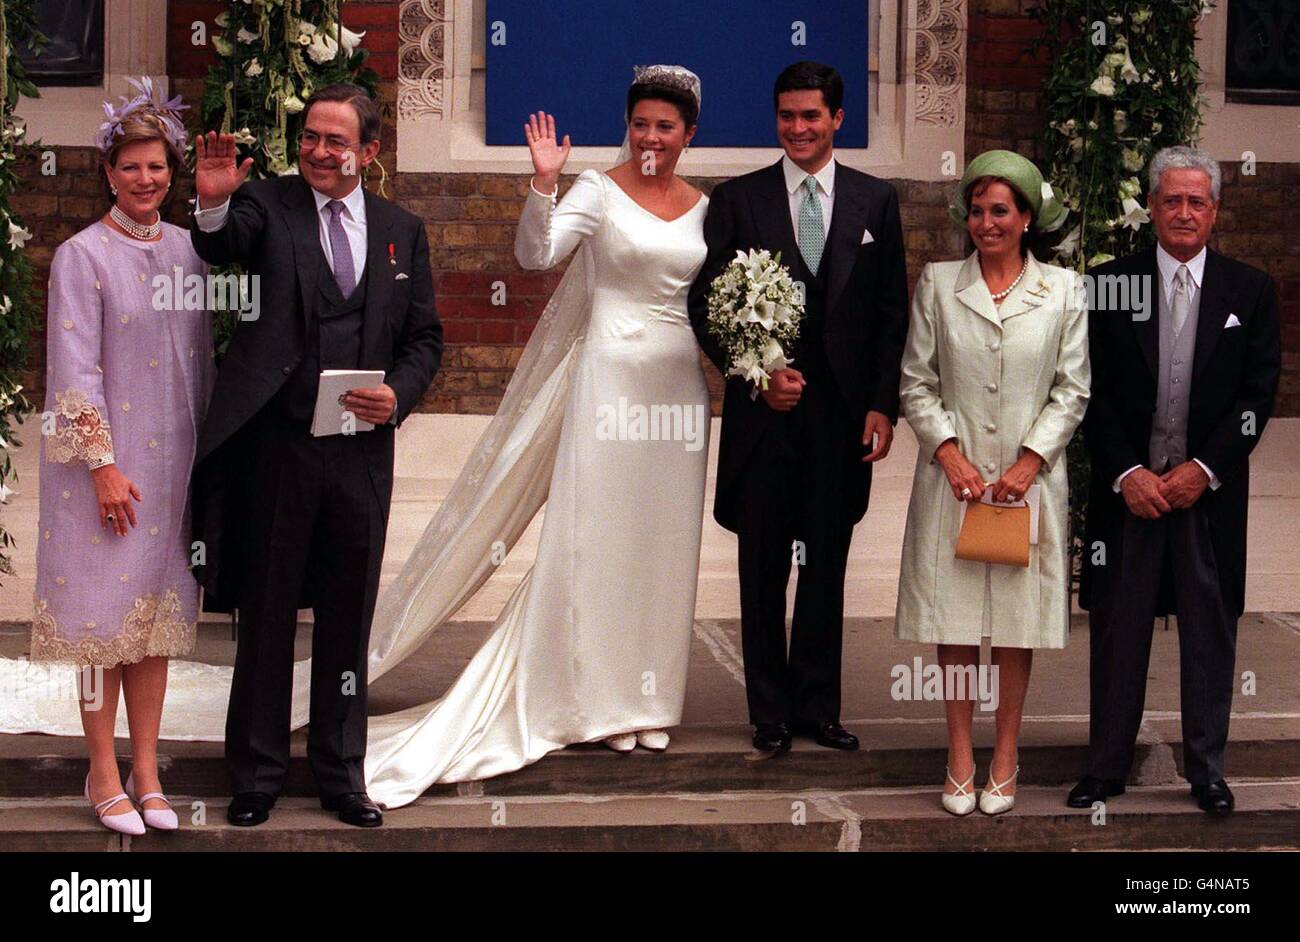 Princess Alexia of Greece and her husband Carlos Morales Quintana of Spain (centre) with (left) her parents to the left, King Constantine and Queen Anne-Marie of Greece and (right) his parents, Miguel Morales Armas and Maria Teresa Quintana Gionzalez. * after the wedding at the Greek Orthodox Cathedral of St Sophia in Bayswater, West London. Stock Photo